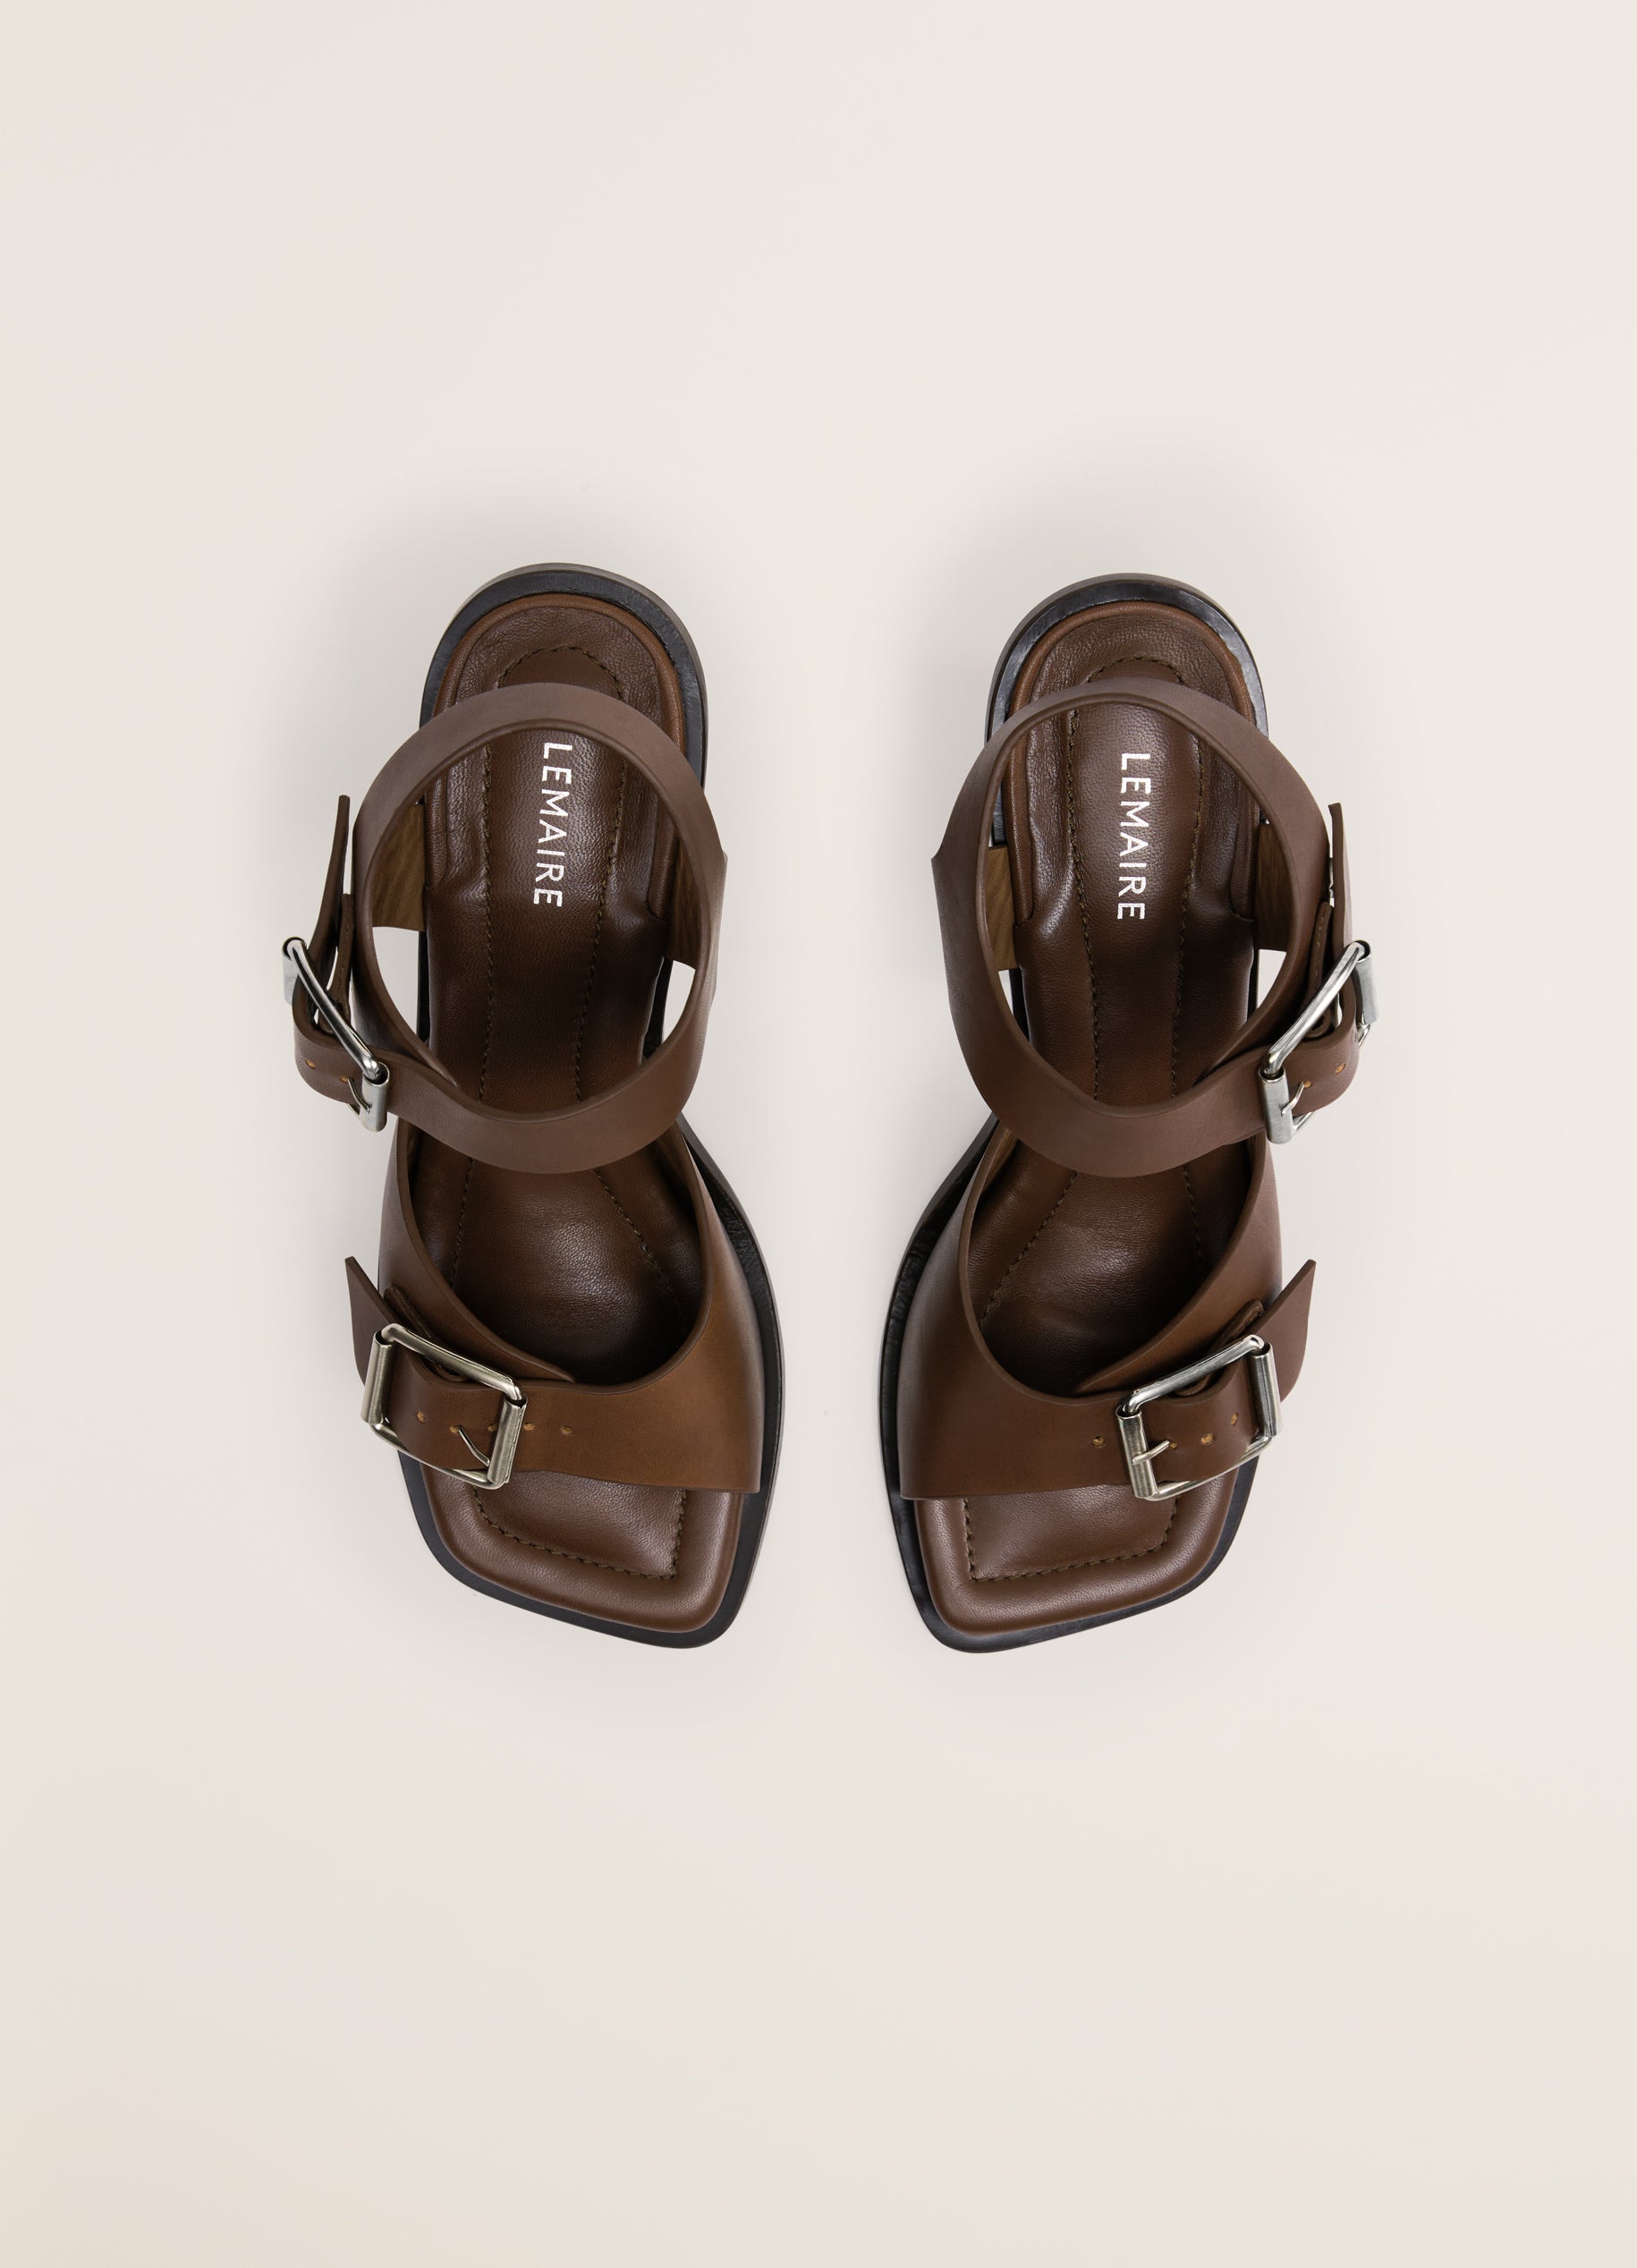 Sandals with Straps and Square Heels, in Dark Tobacco | LEMAIRE